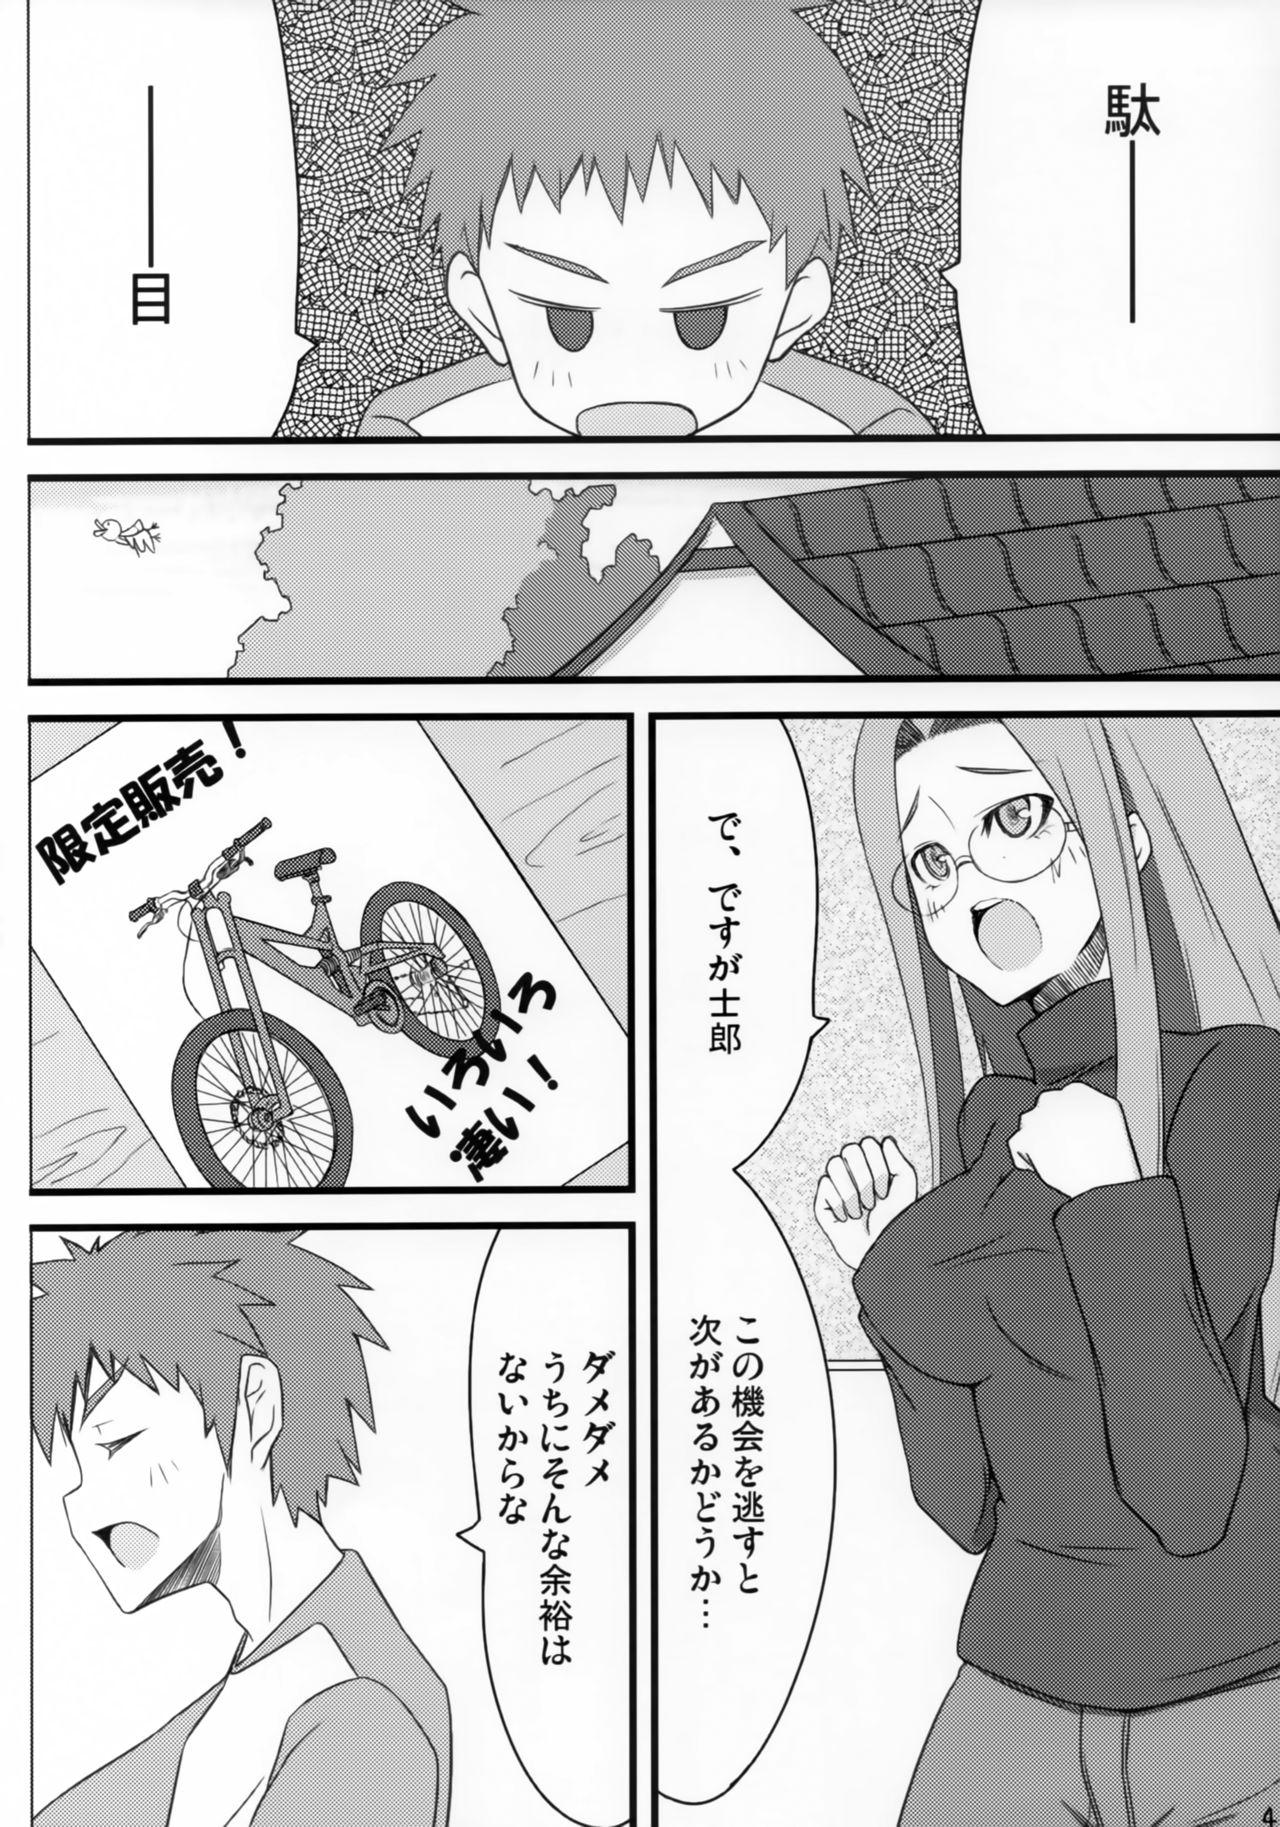 Guys R4 - Fate stay night Skinny - Page 3